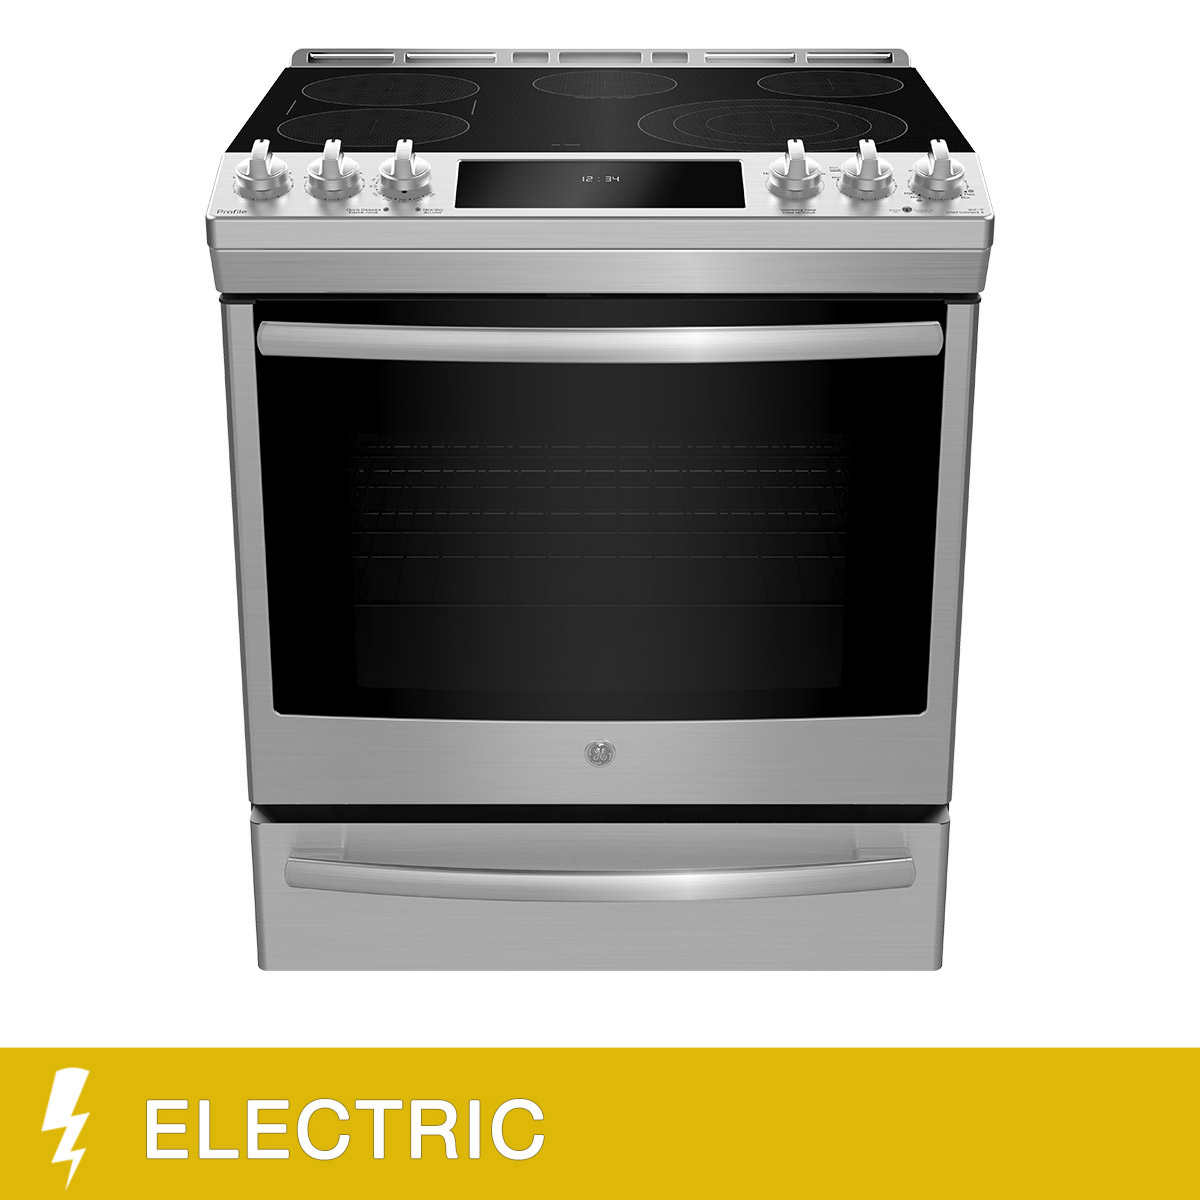 Ge Profile Double Oven Electric Range Slide In Frigidaire Oven Electric